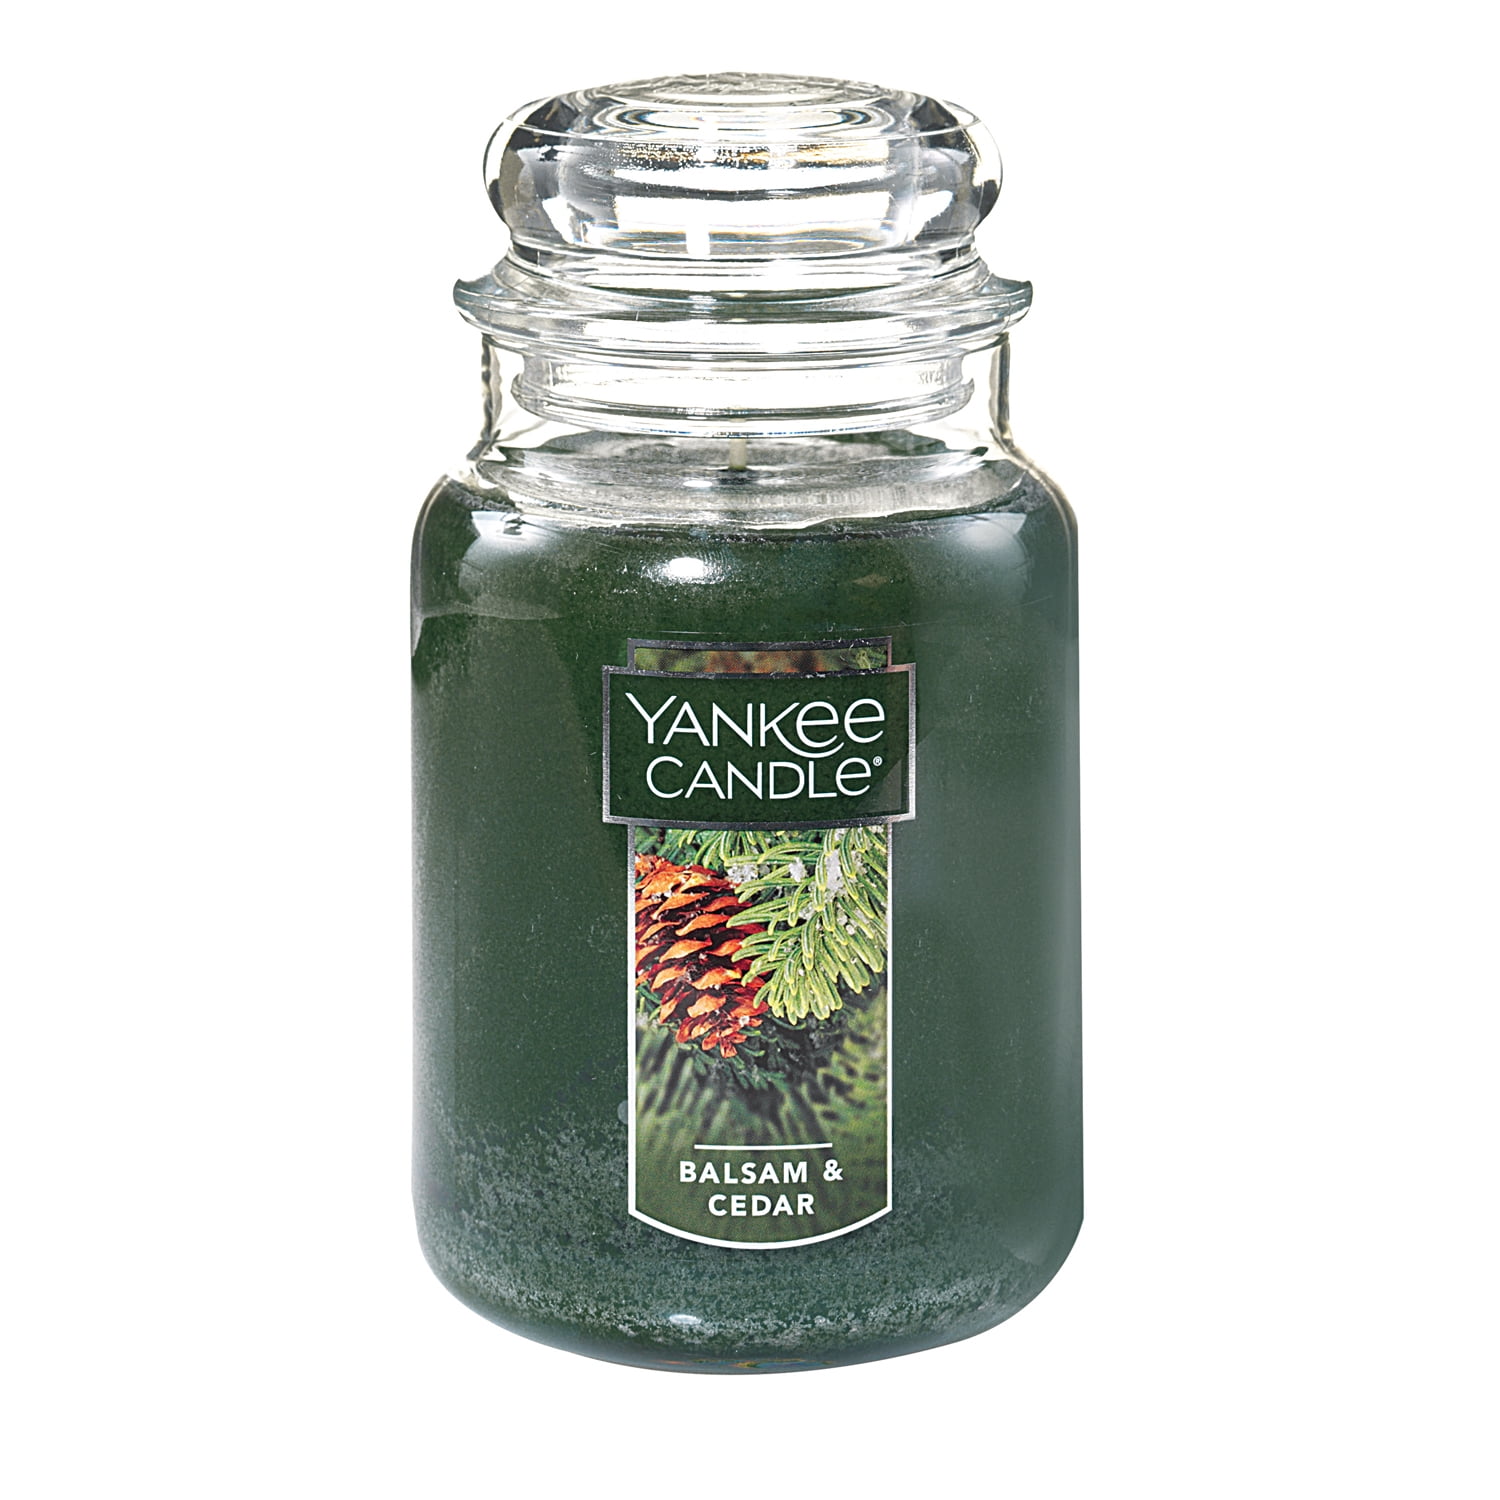 New Yankee Candle Balsam Fir 9oz Candle Tin  Limited Edition 